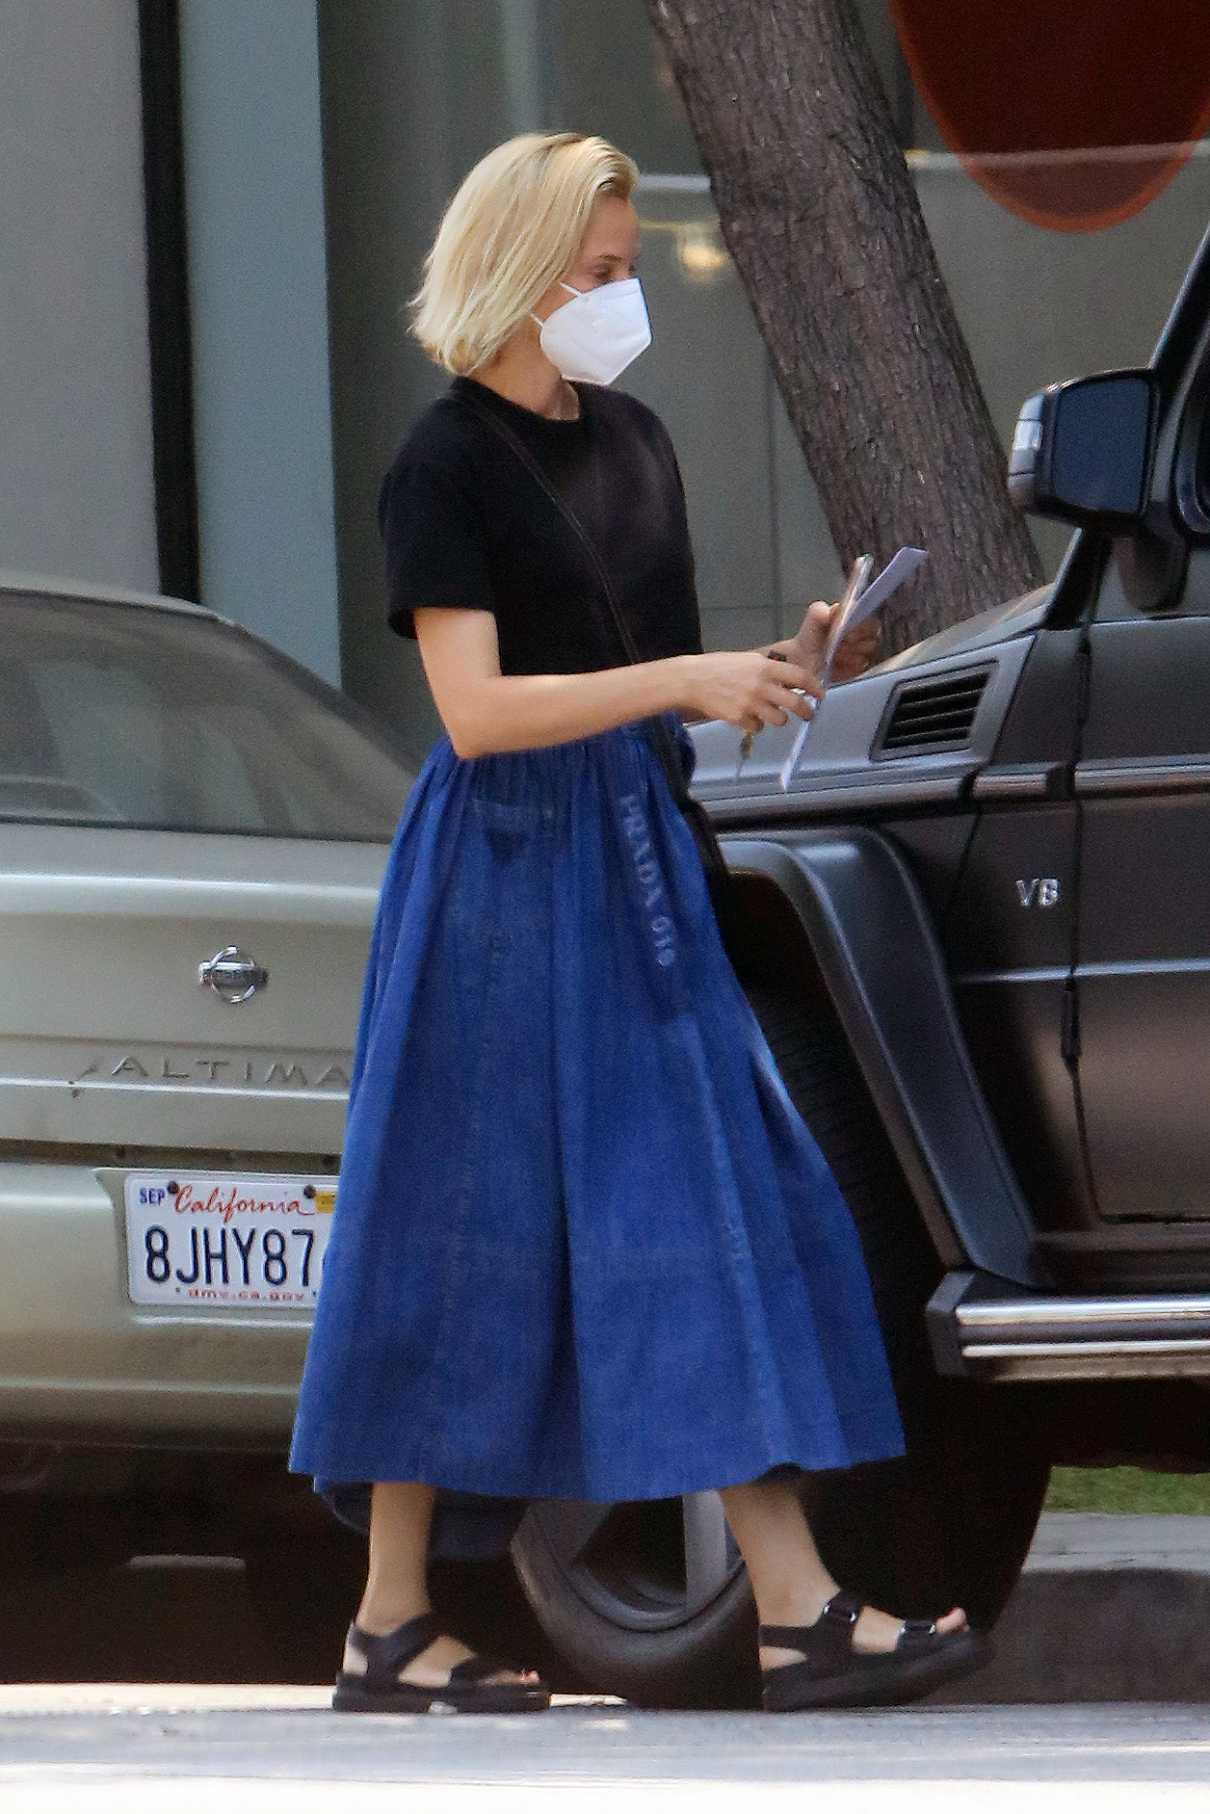 Diane Kruger in Blue Skirt Goes Grocery Shopping in Los Angeles 09/17 ...